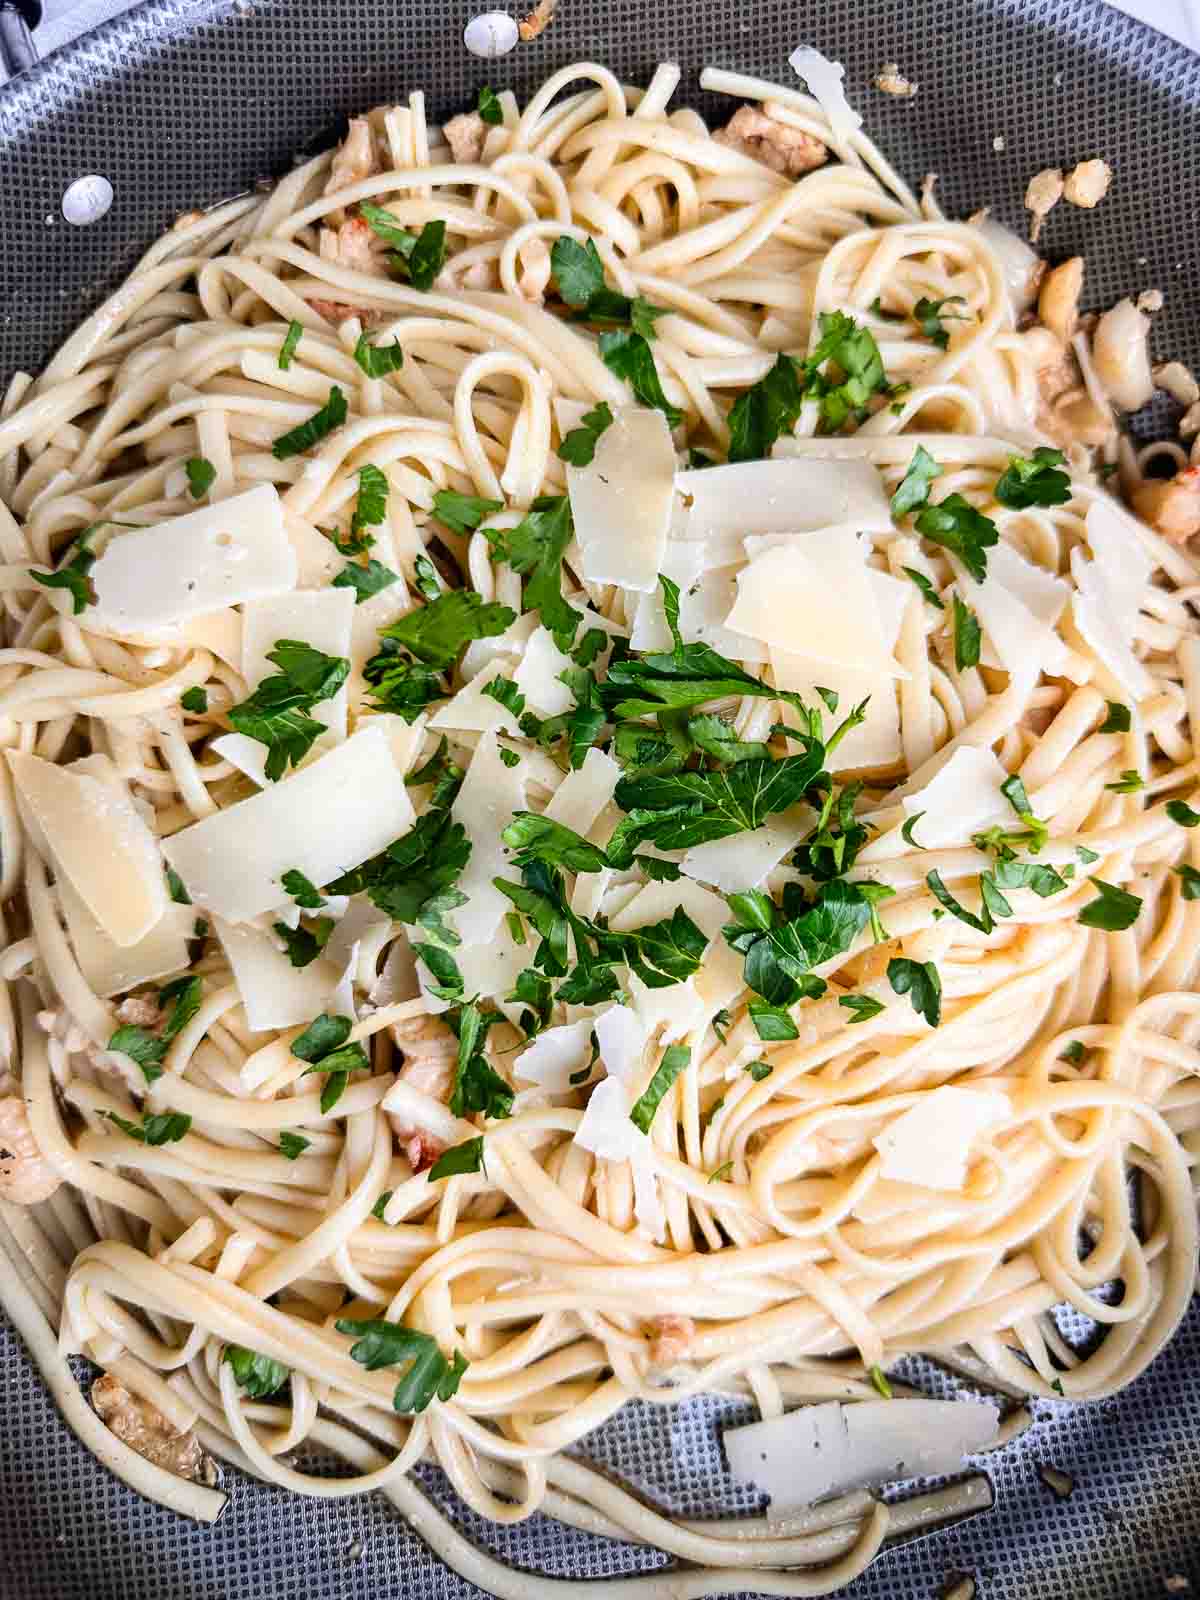 Top the lobster pasta with fresh parsley and Parmesan cheese.